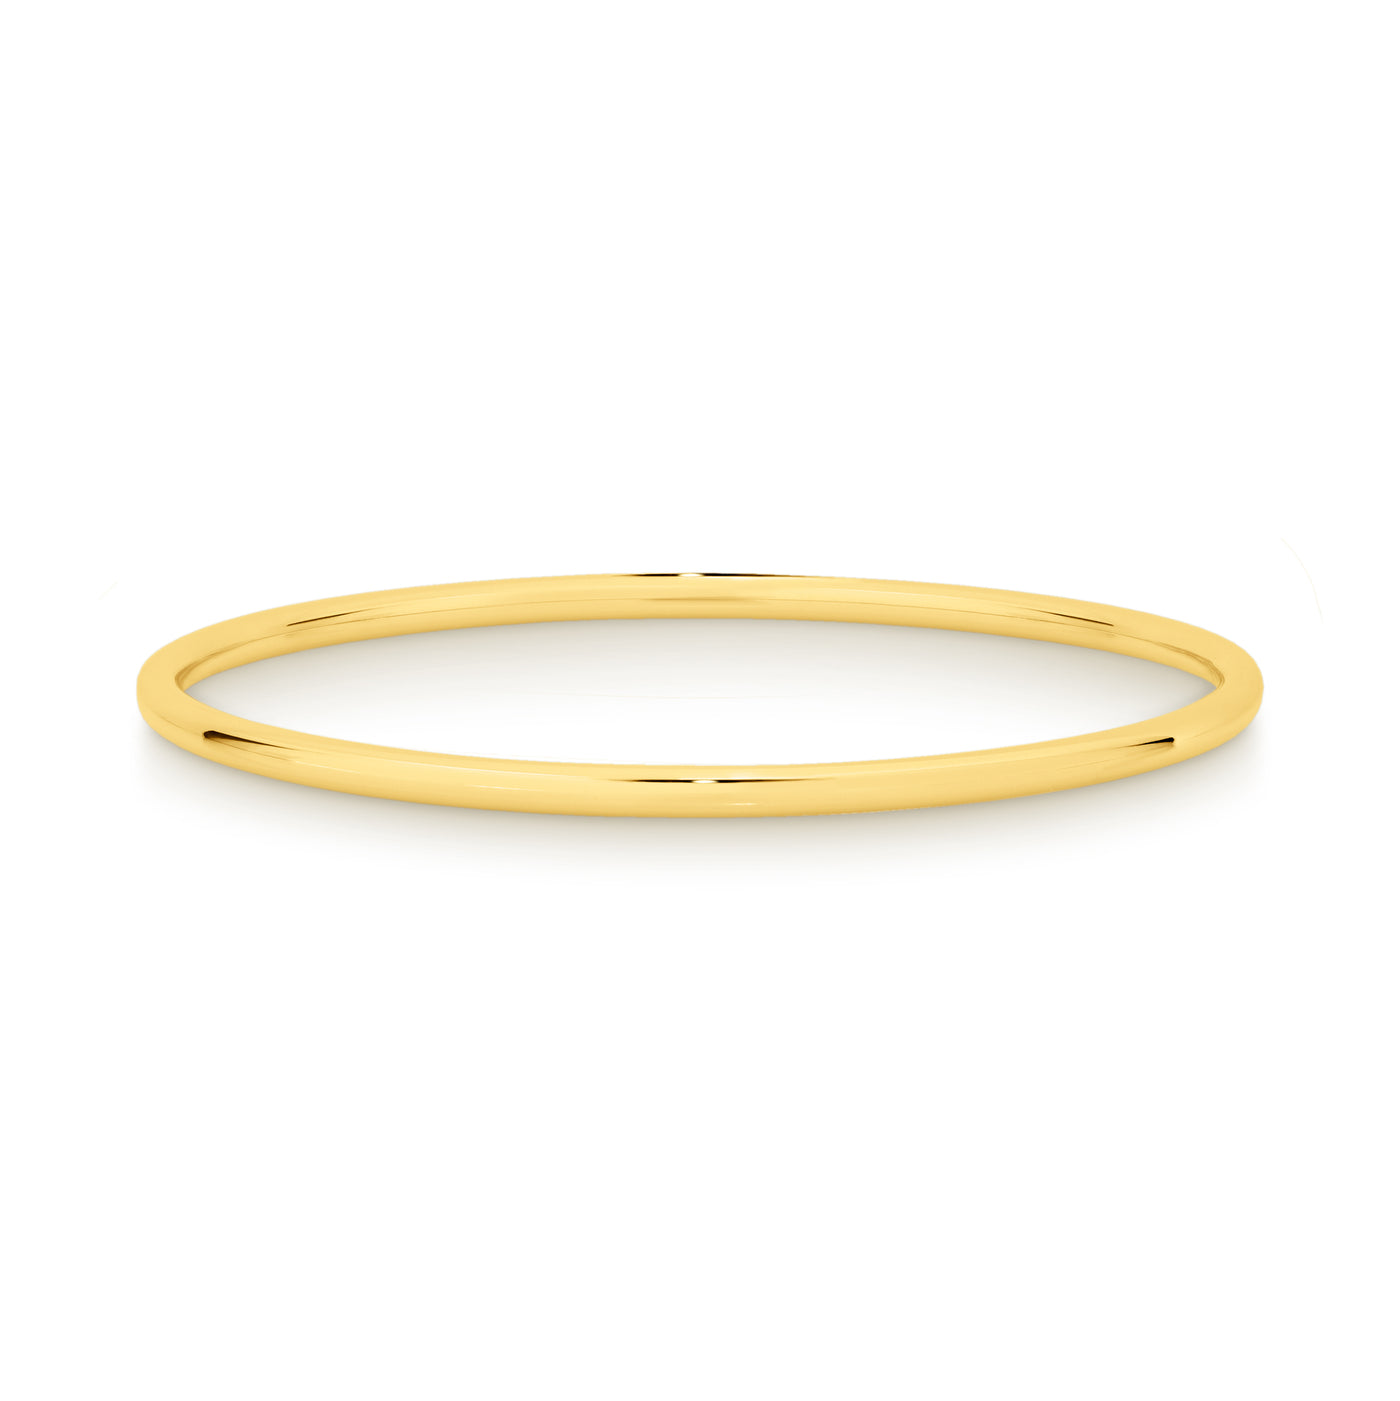 9Ct Yellow Gold And Sterling Silver Bonded Bangle